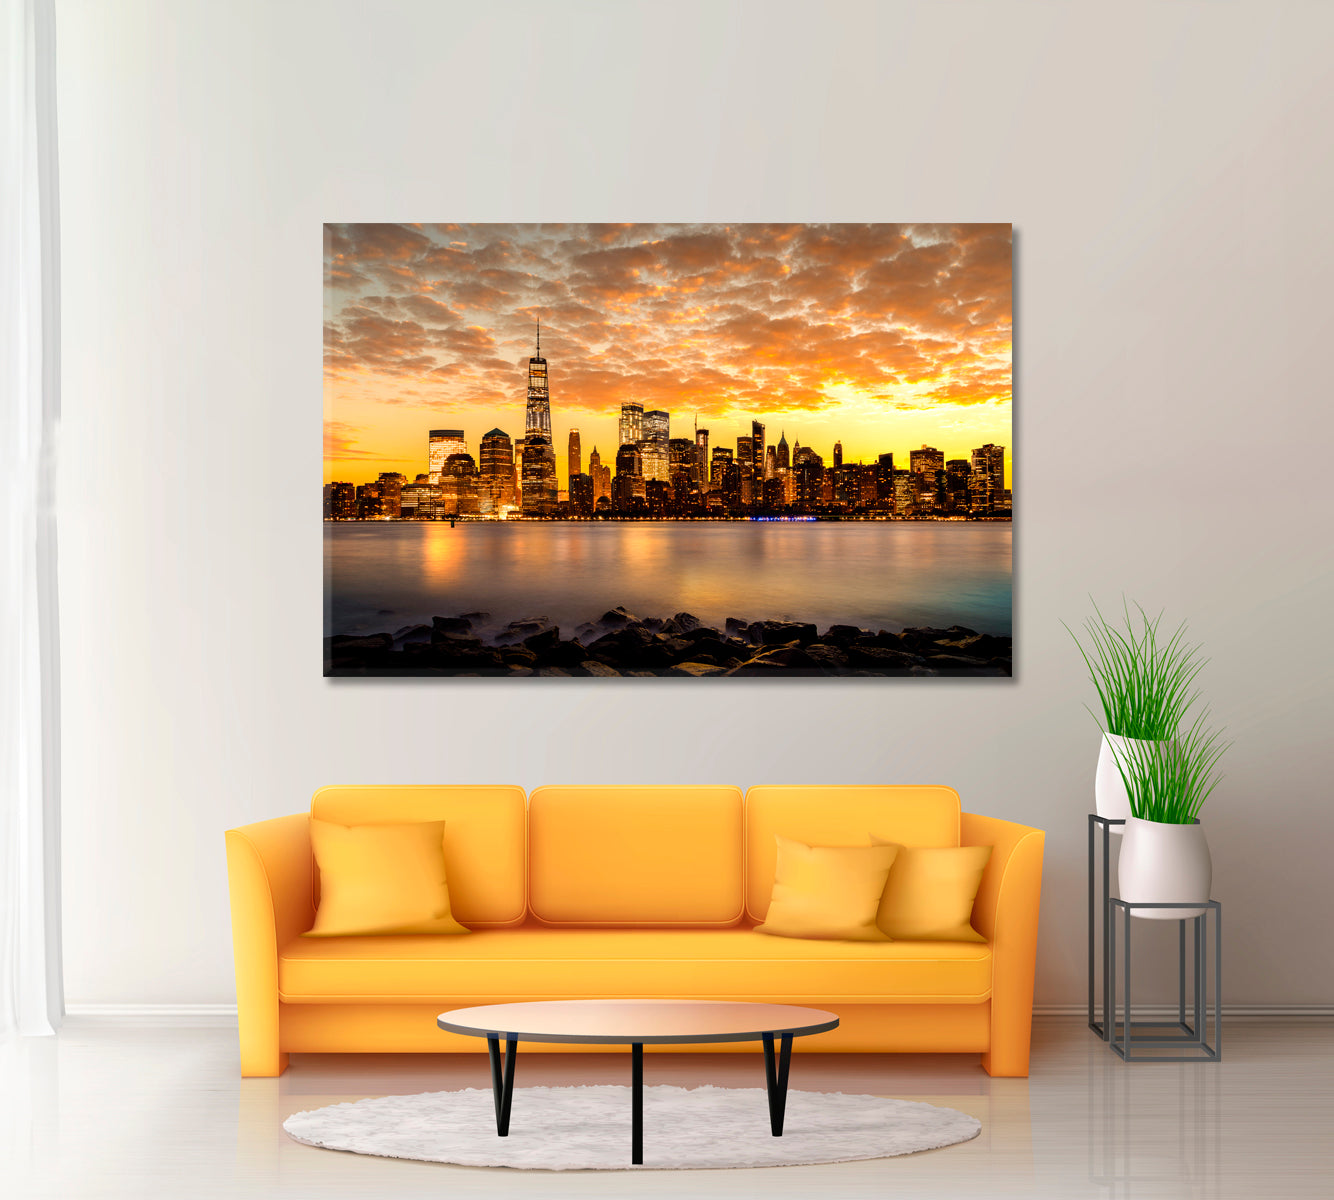 New York Cityscape at Sunset Canvas Print ArtLexy 1 Panel 24"x16" inches 